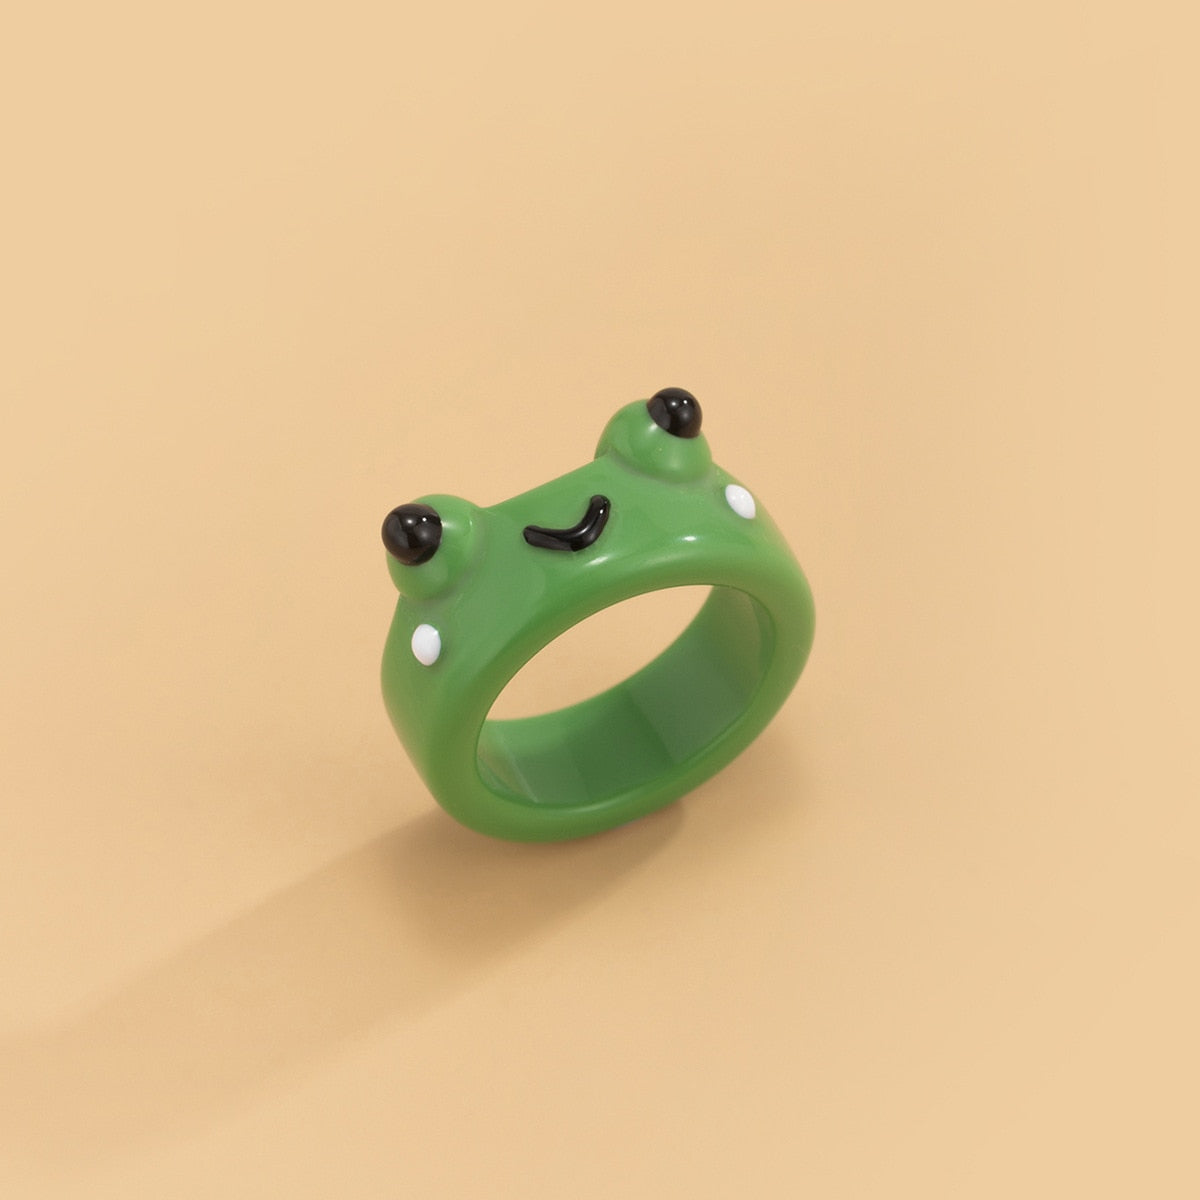 Acrylic Frog Ring Chick Resin Rings For Women Girls Simple Animal Aesthetic Jewelry Friendship Rings Greative Party Travel Gifts